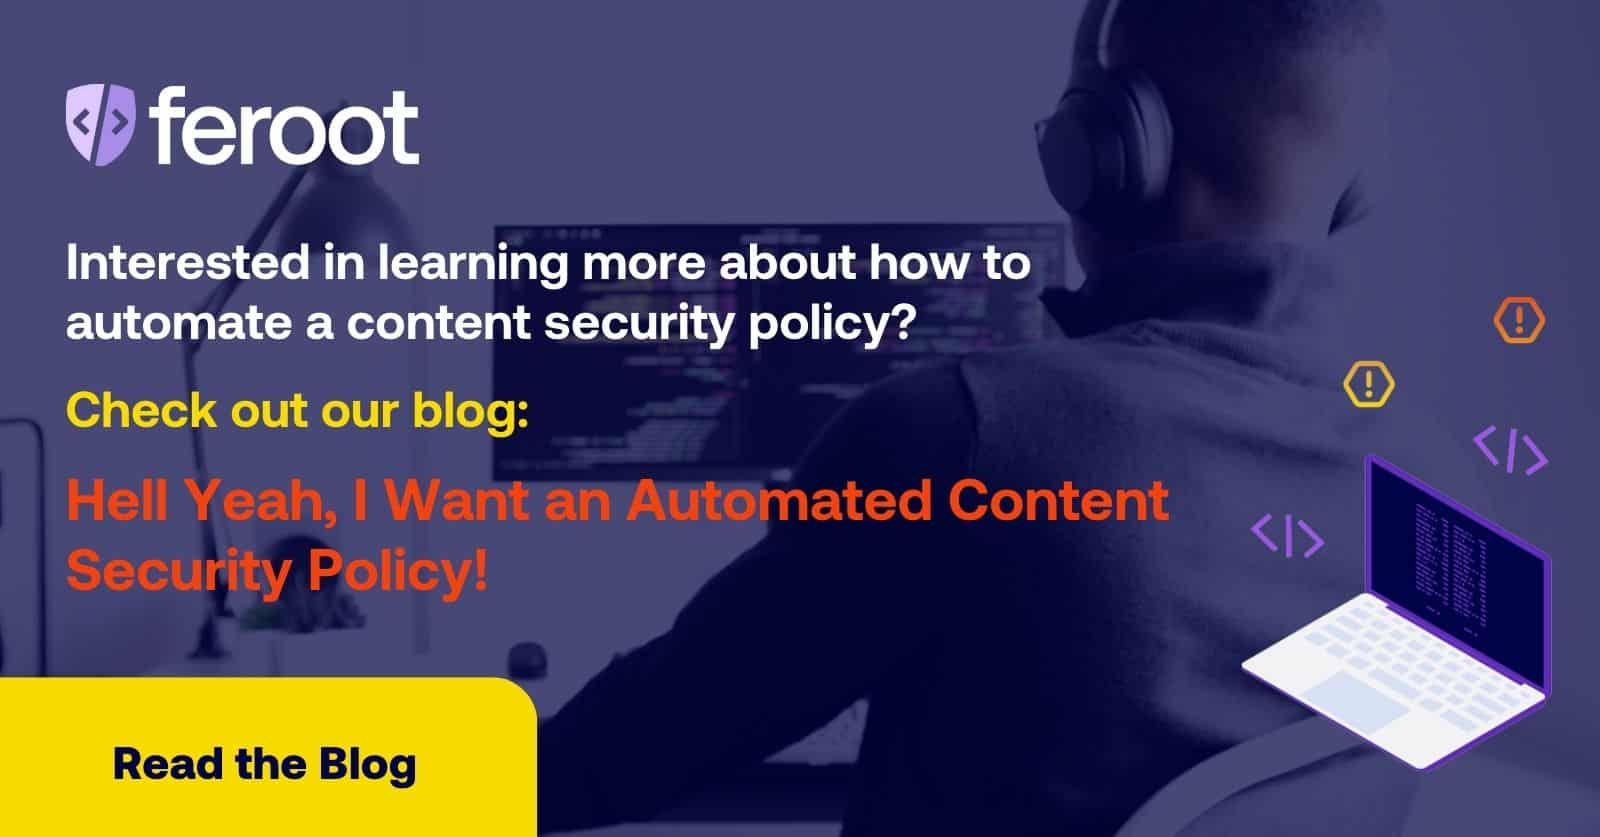 Interested in learning more abou thow to automate a content security policy? Check out our blog: Hell Yea, I Want an Automated Content Security Policy!